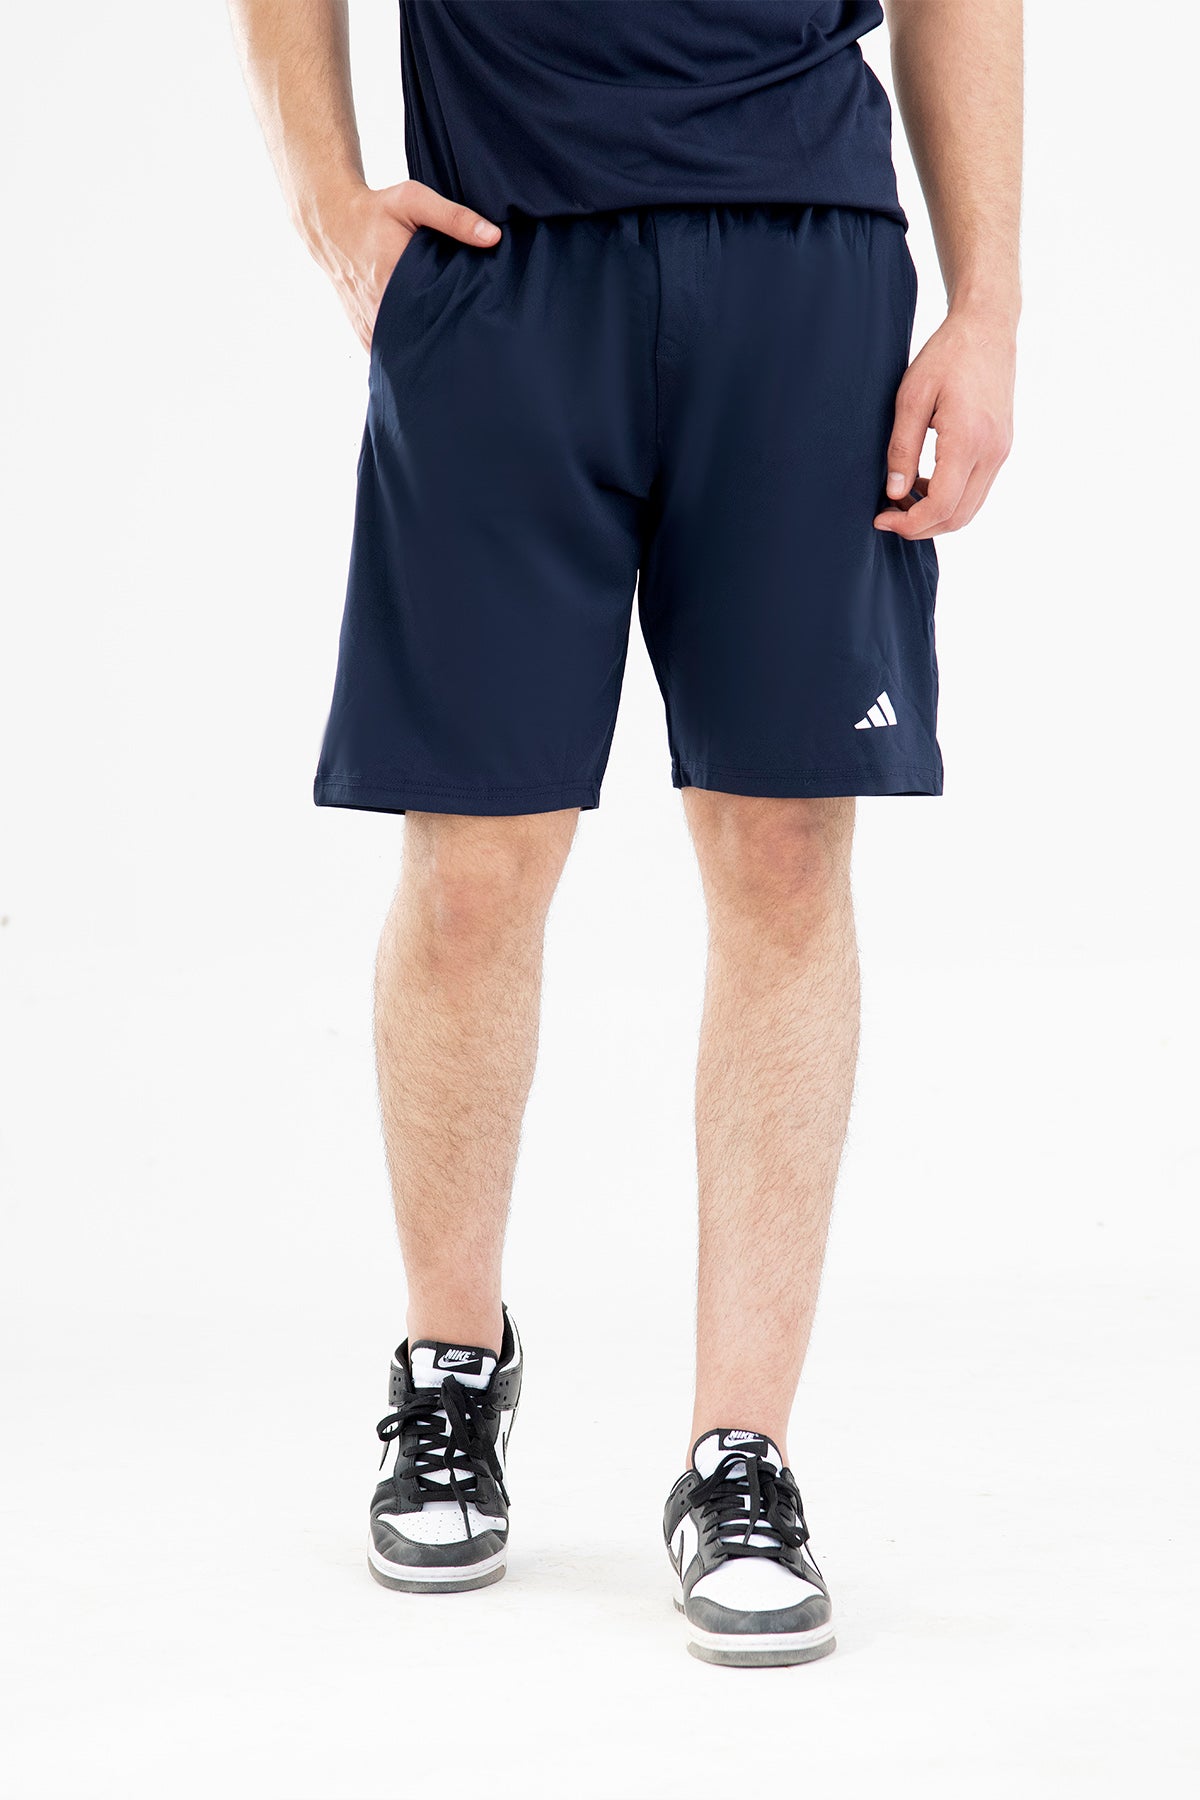 Adidas Blue Dry-Fit shorts